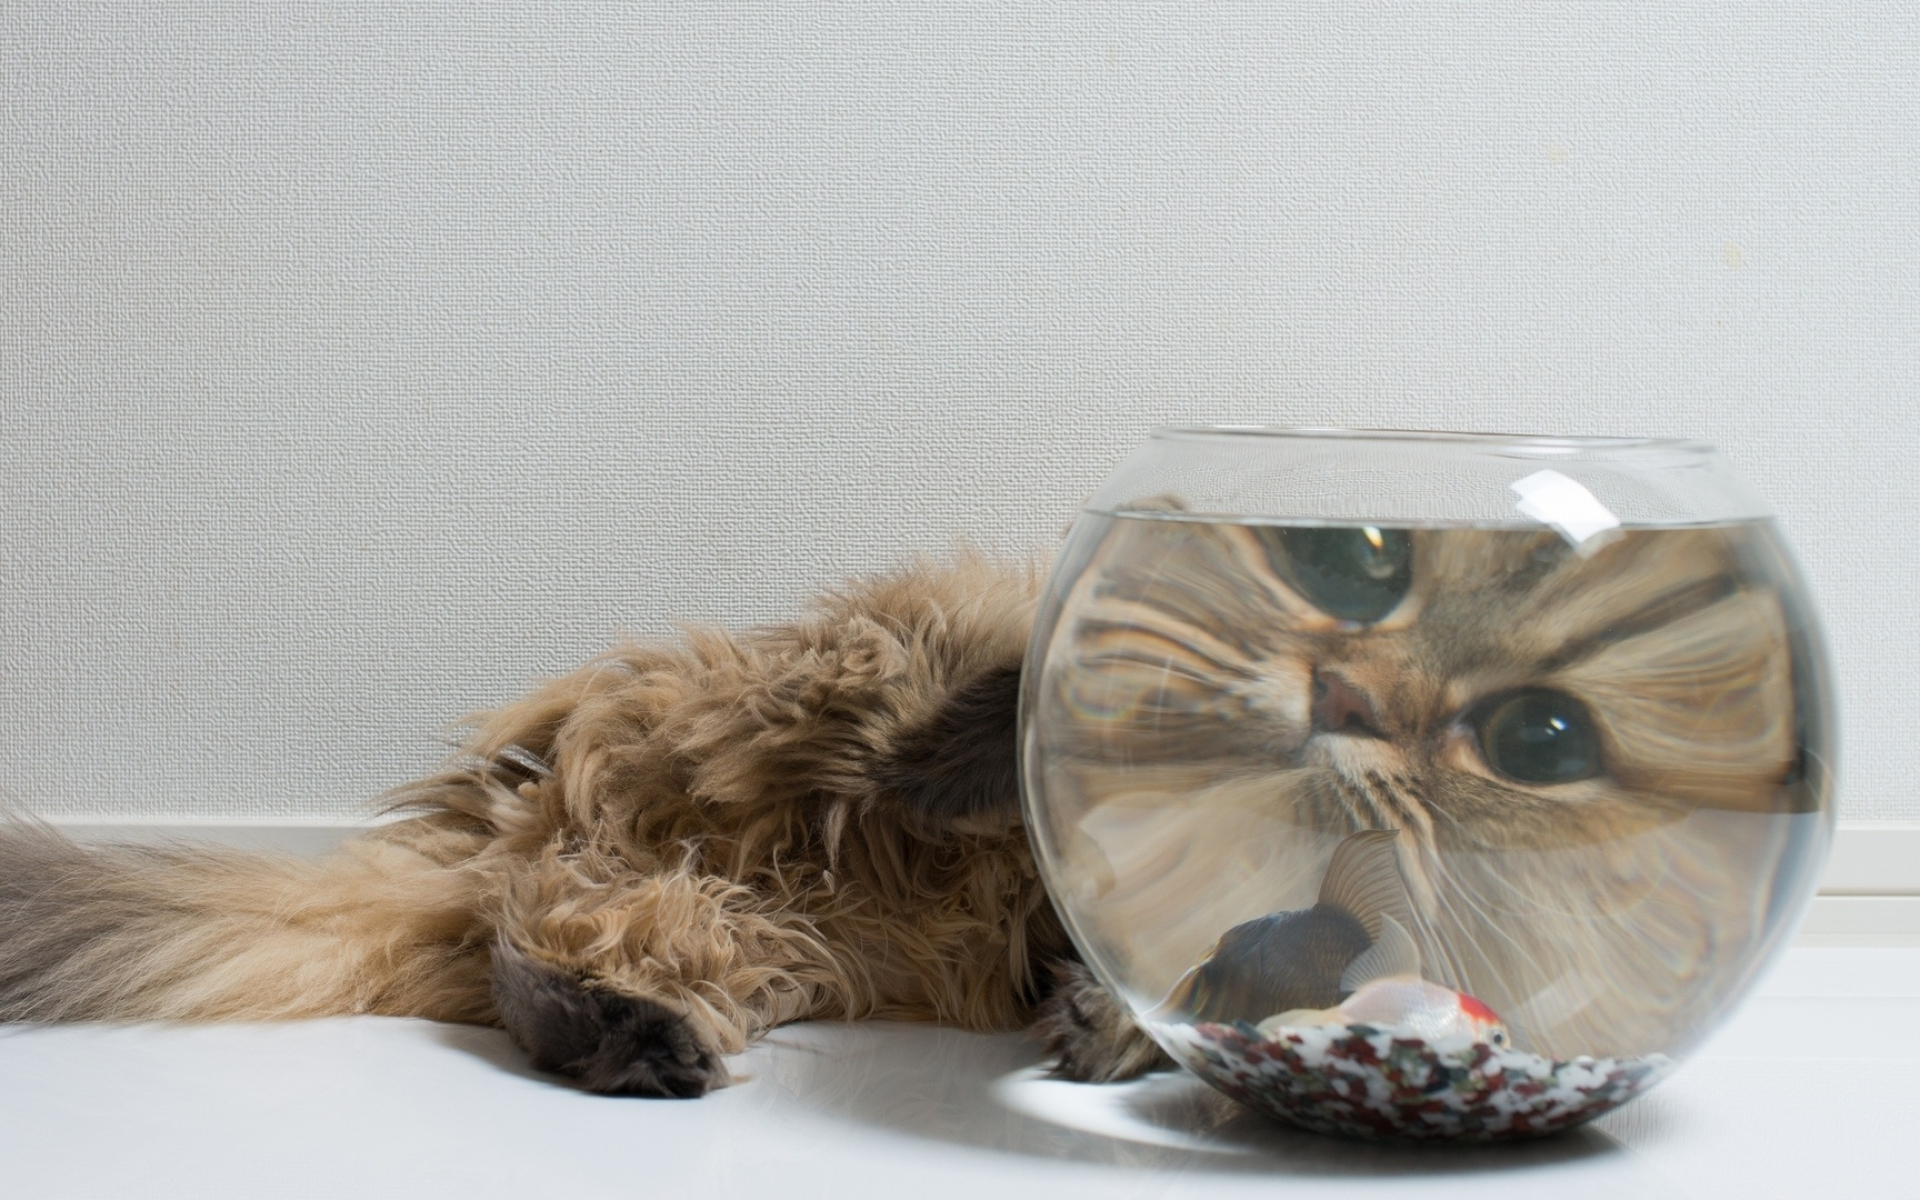 Fishbowl, Fluffy cat, Unique perspective, Animal wallpapers, 1920x1200 HD Desktop